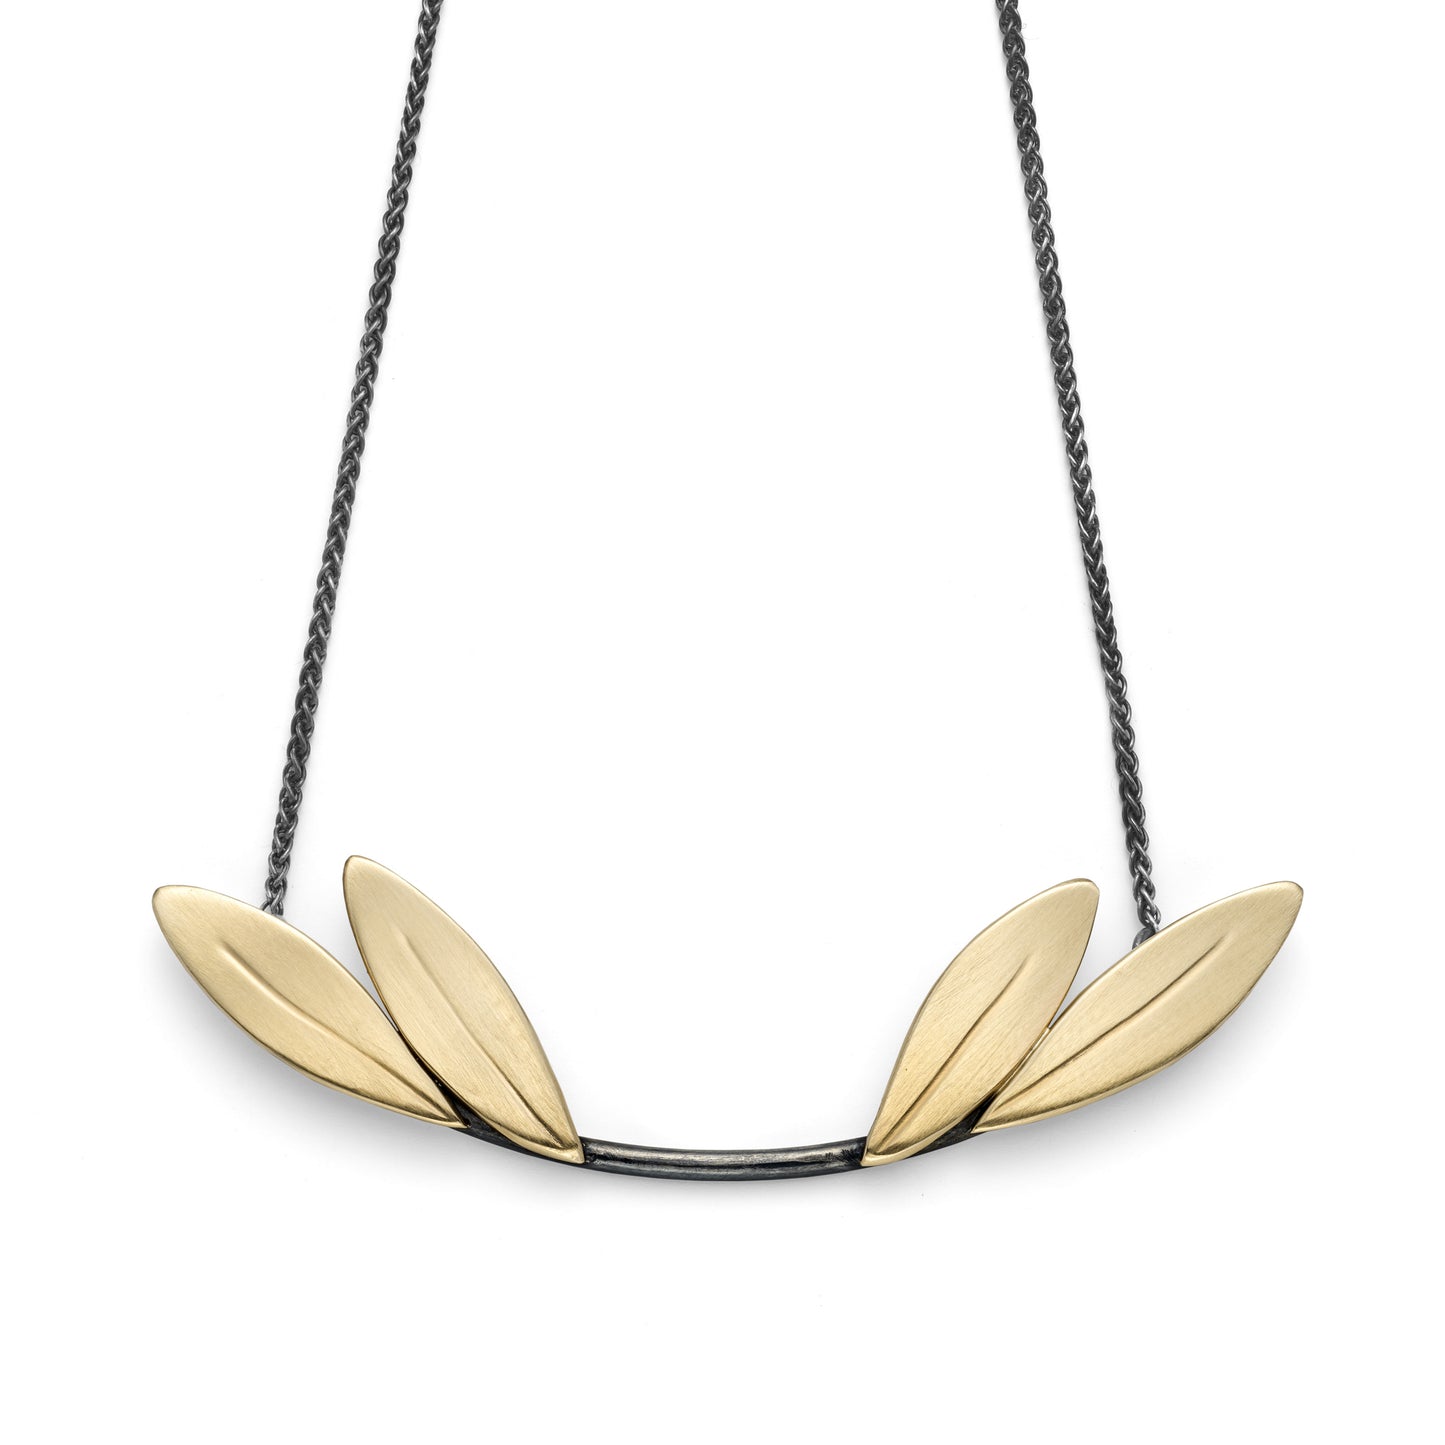 Mirrored Olive Branch Necklace